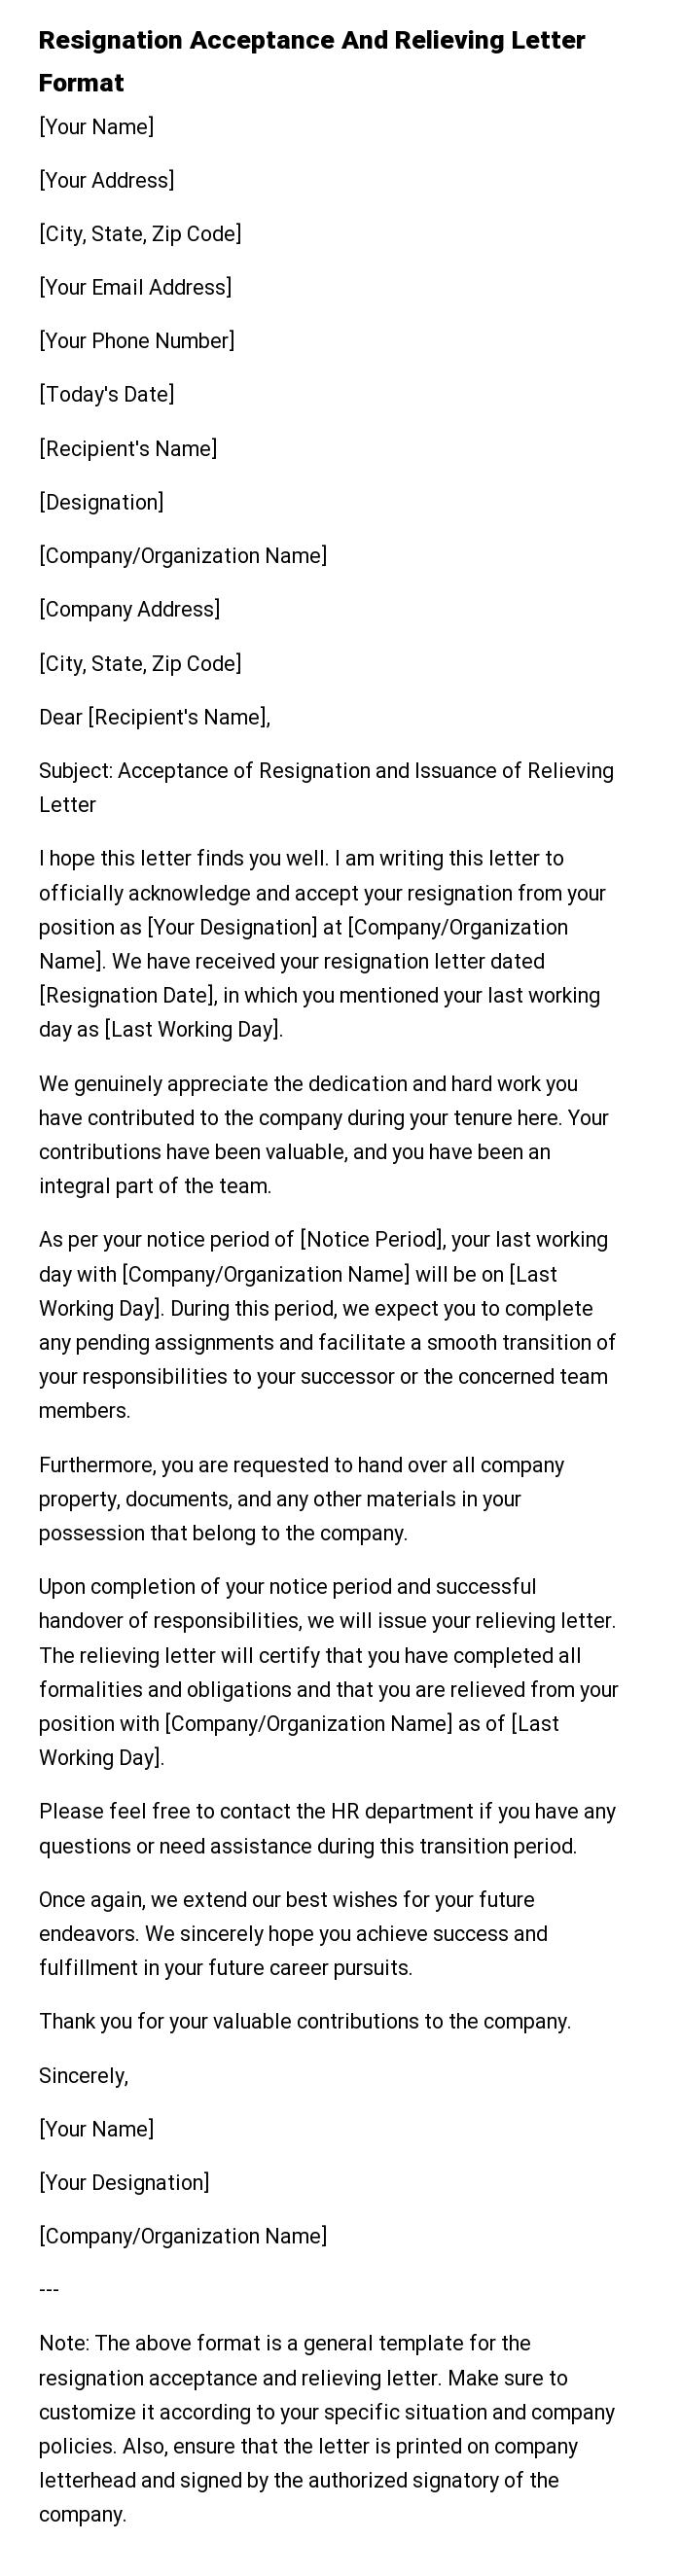 Resignation Acceptance And Relieving Letter Format